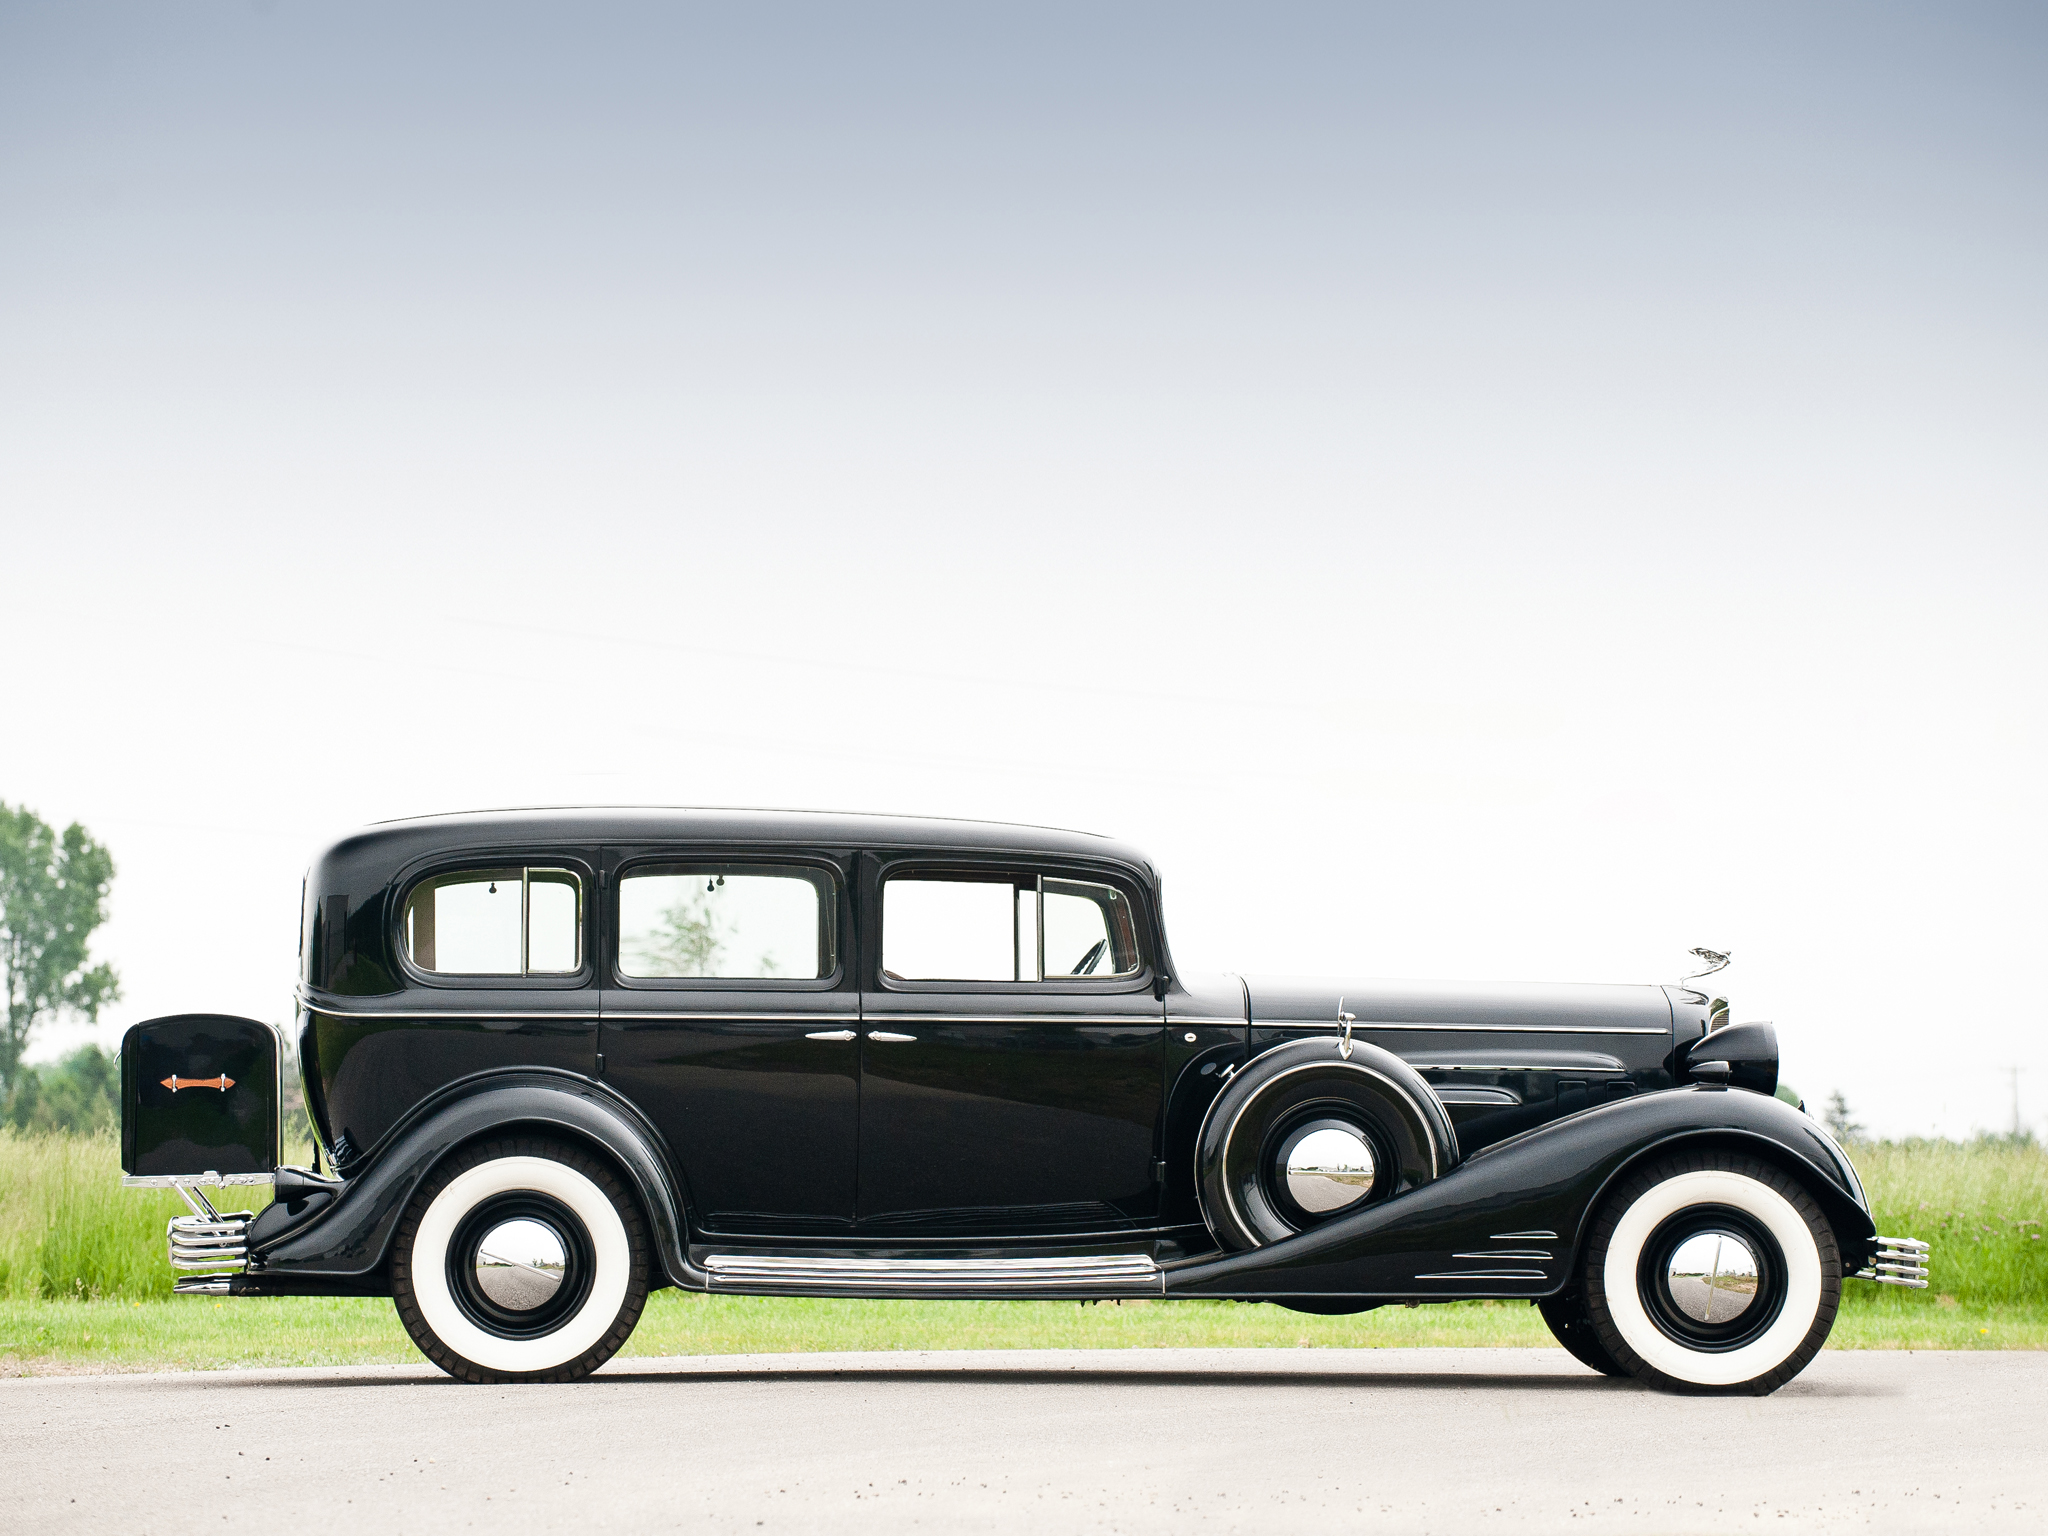 Amazing 1933 Cadillac V-16 Pictures & Backgrounds